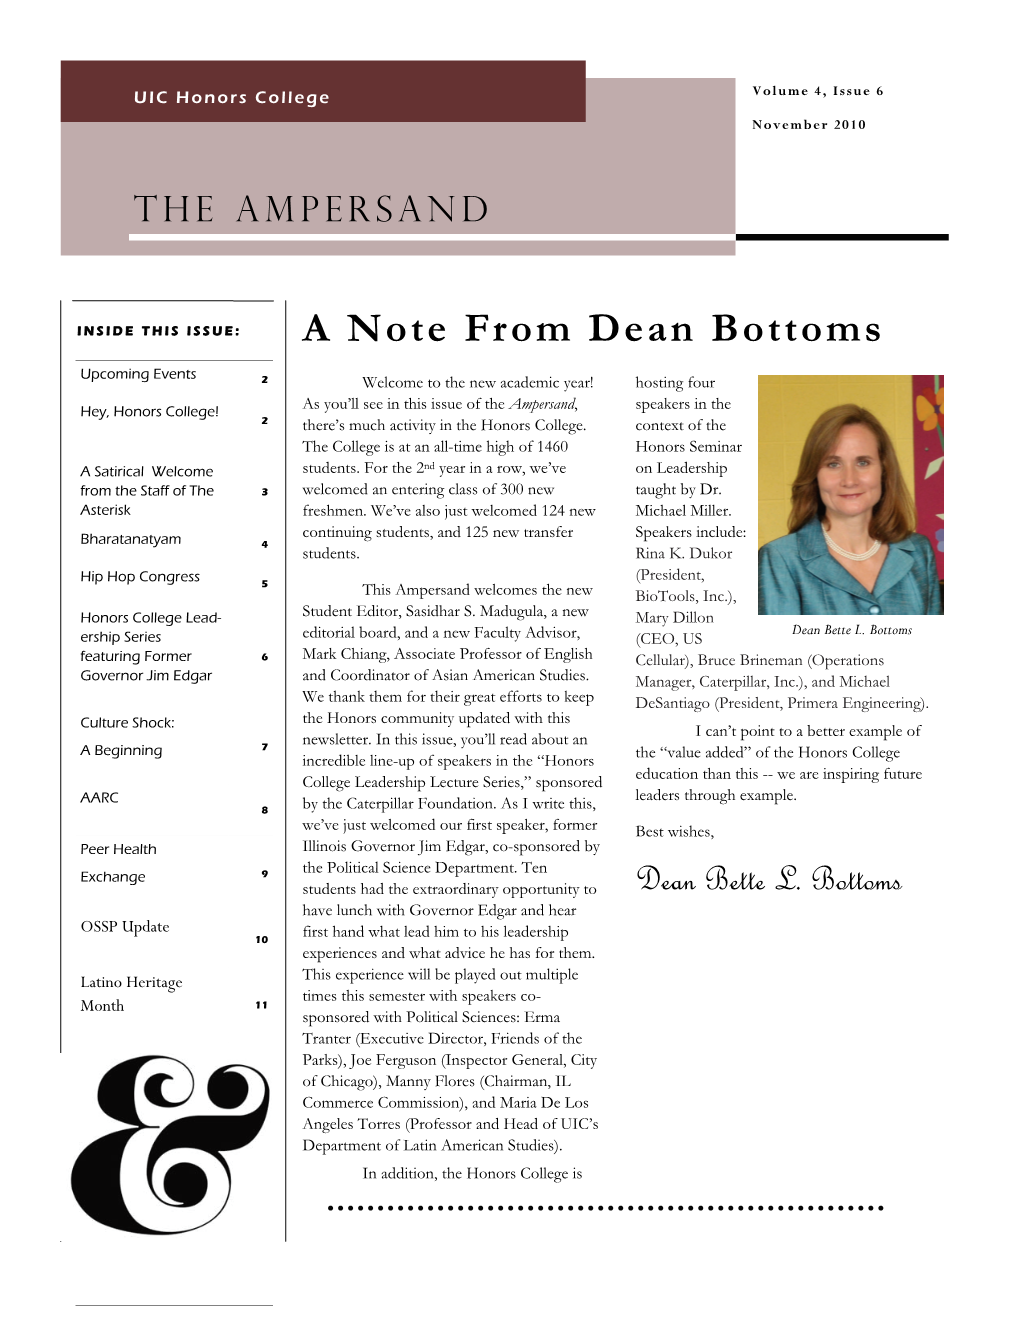 A Note from Dean Bottoms